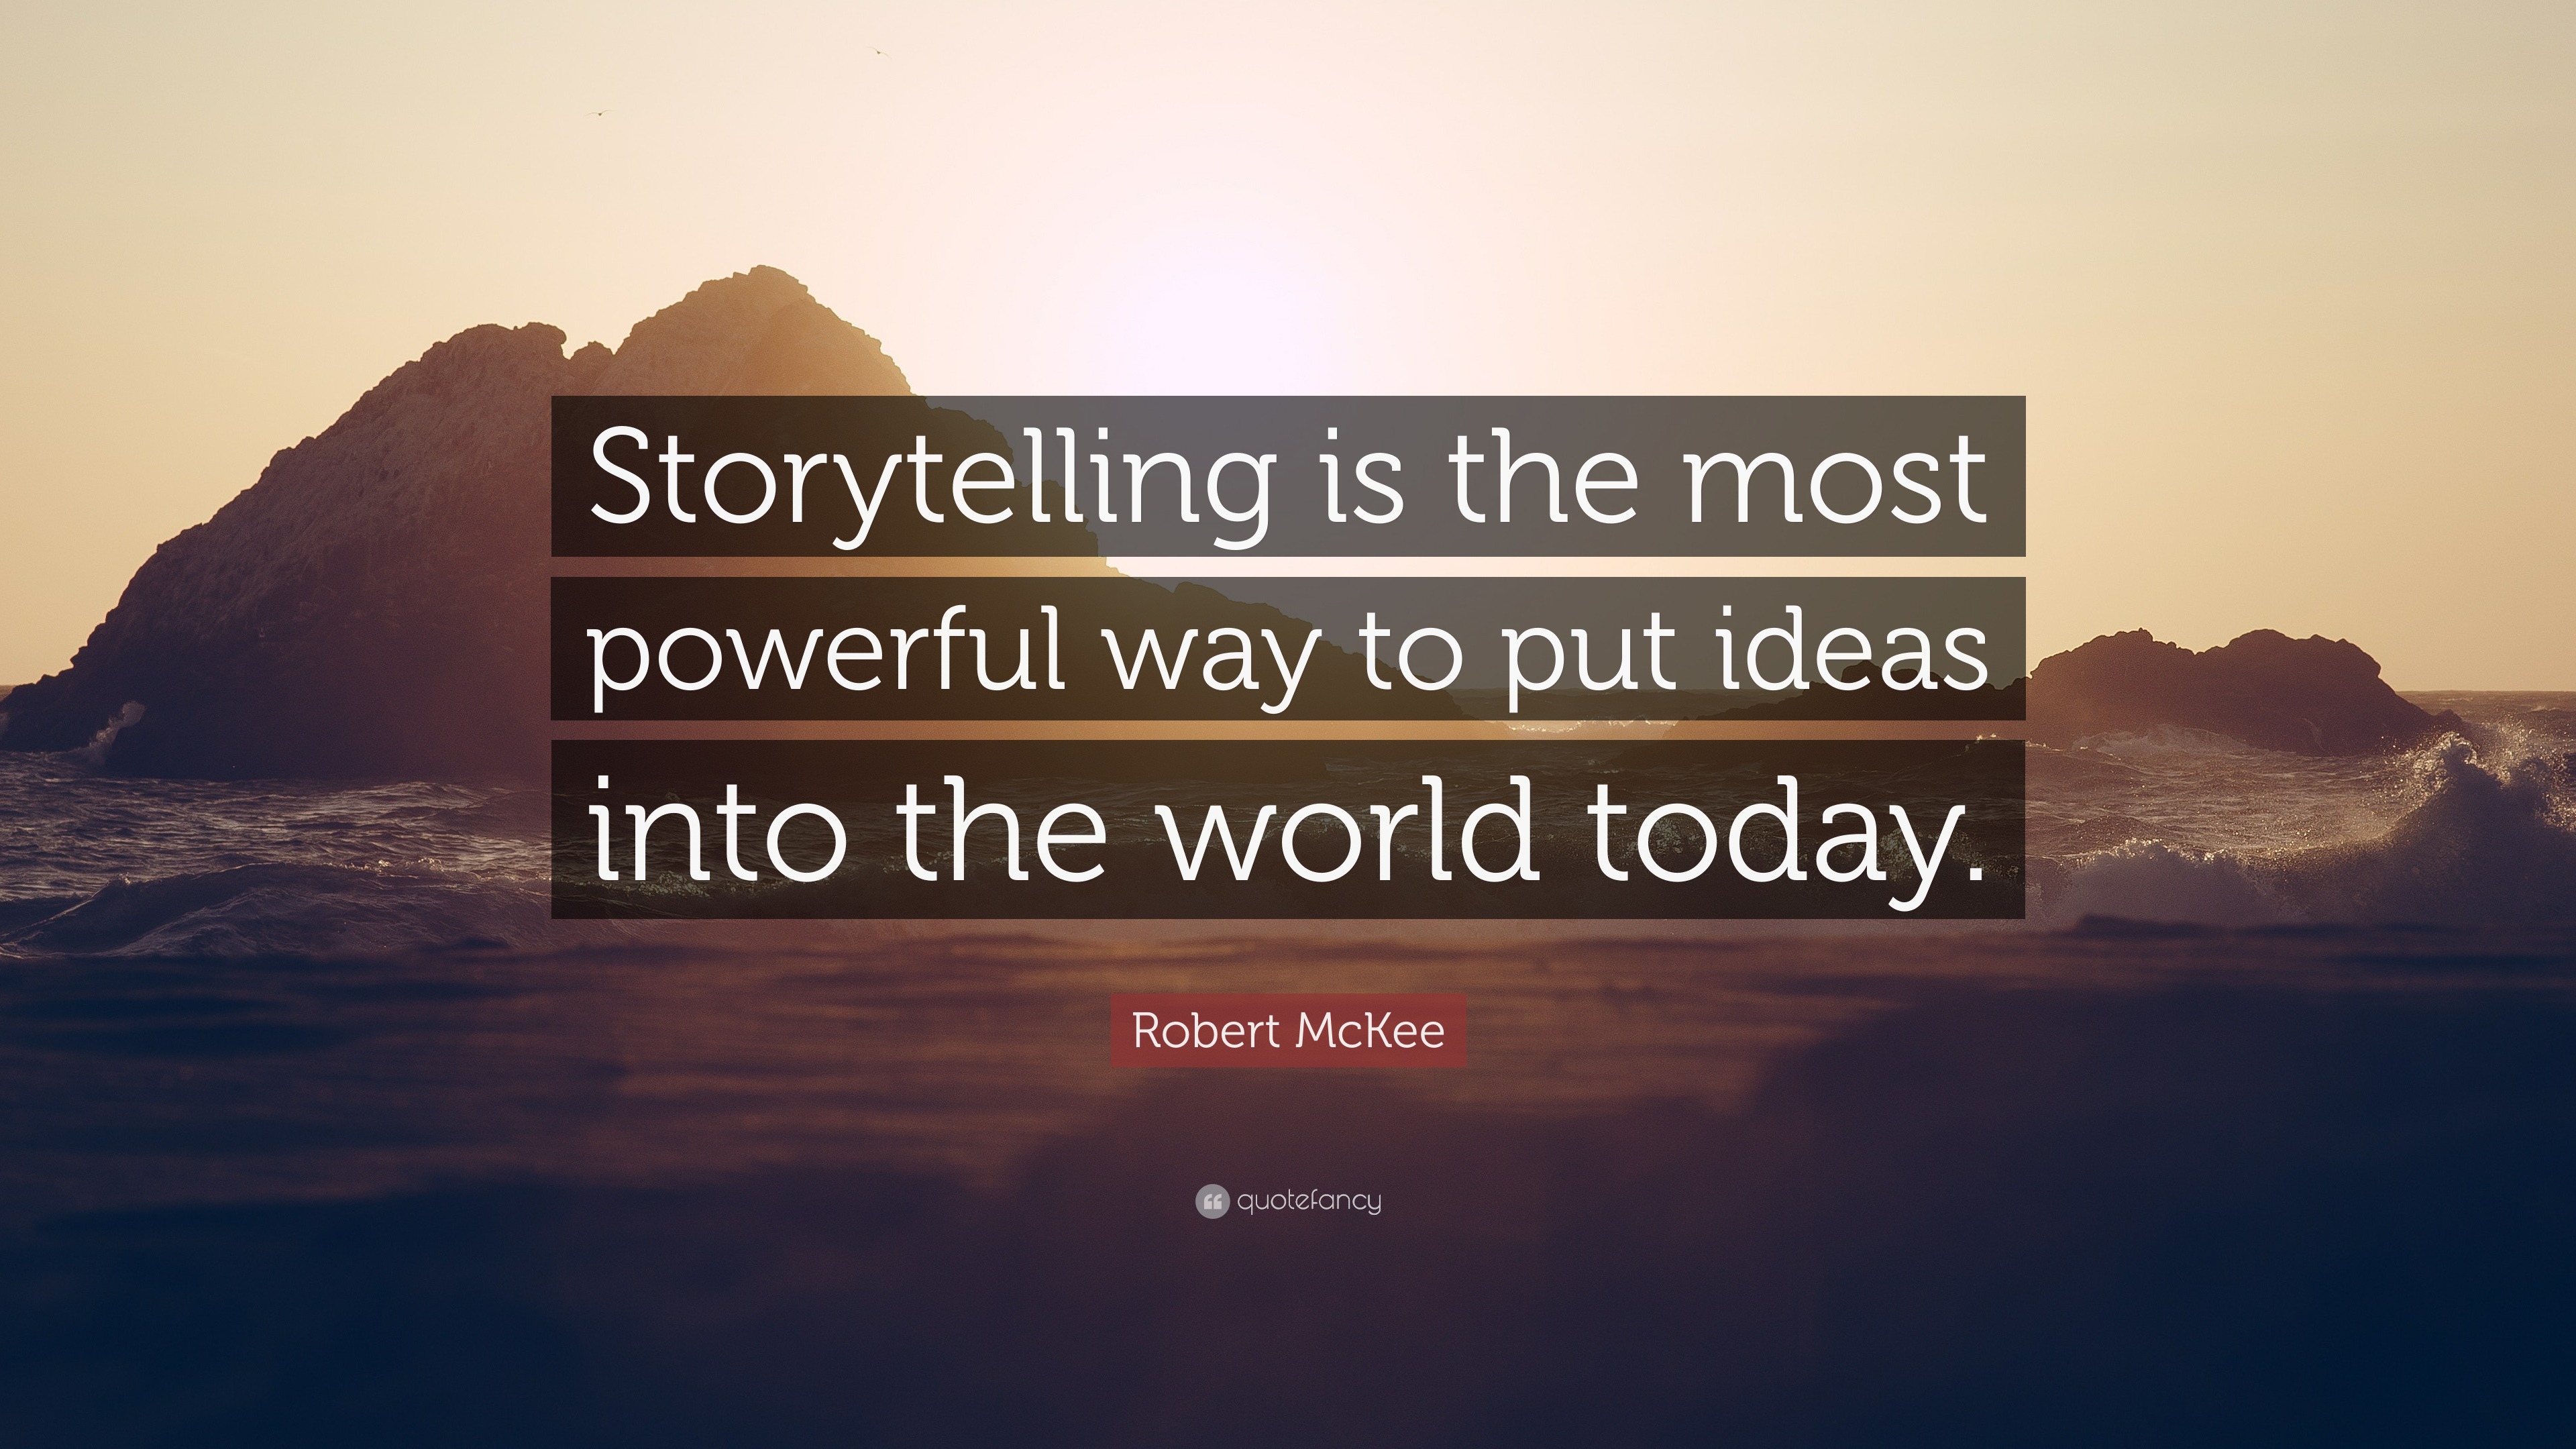 Robert McKee Quote: "Storytelling is the most powerful way to put idea...